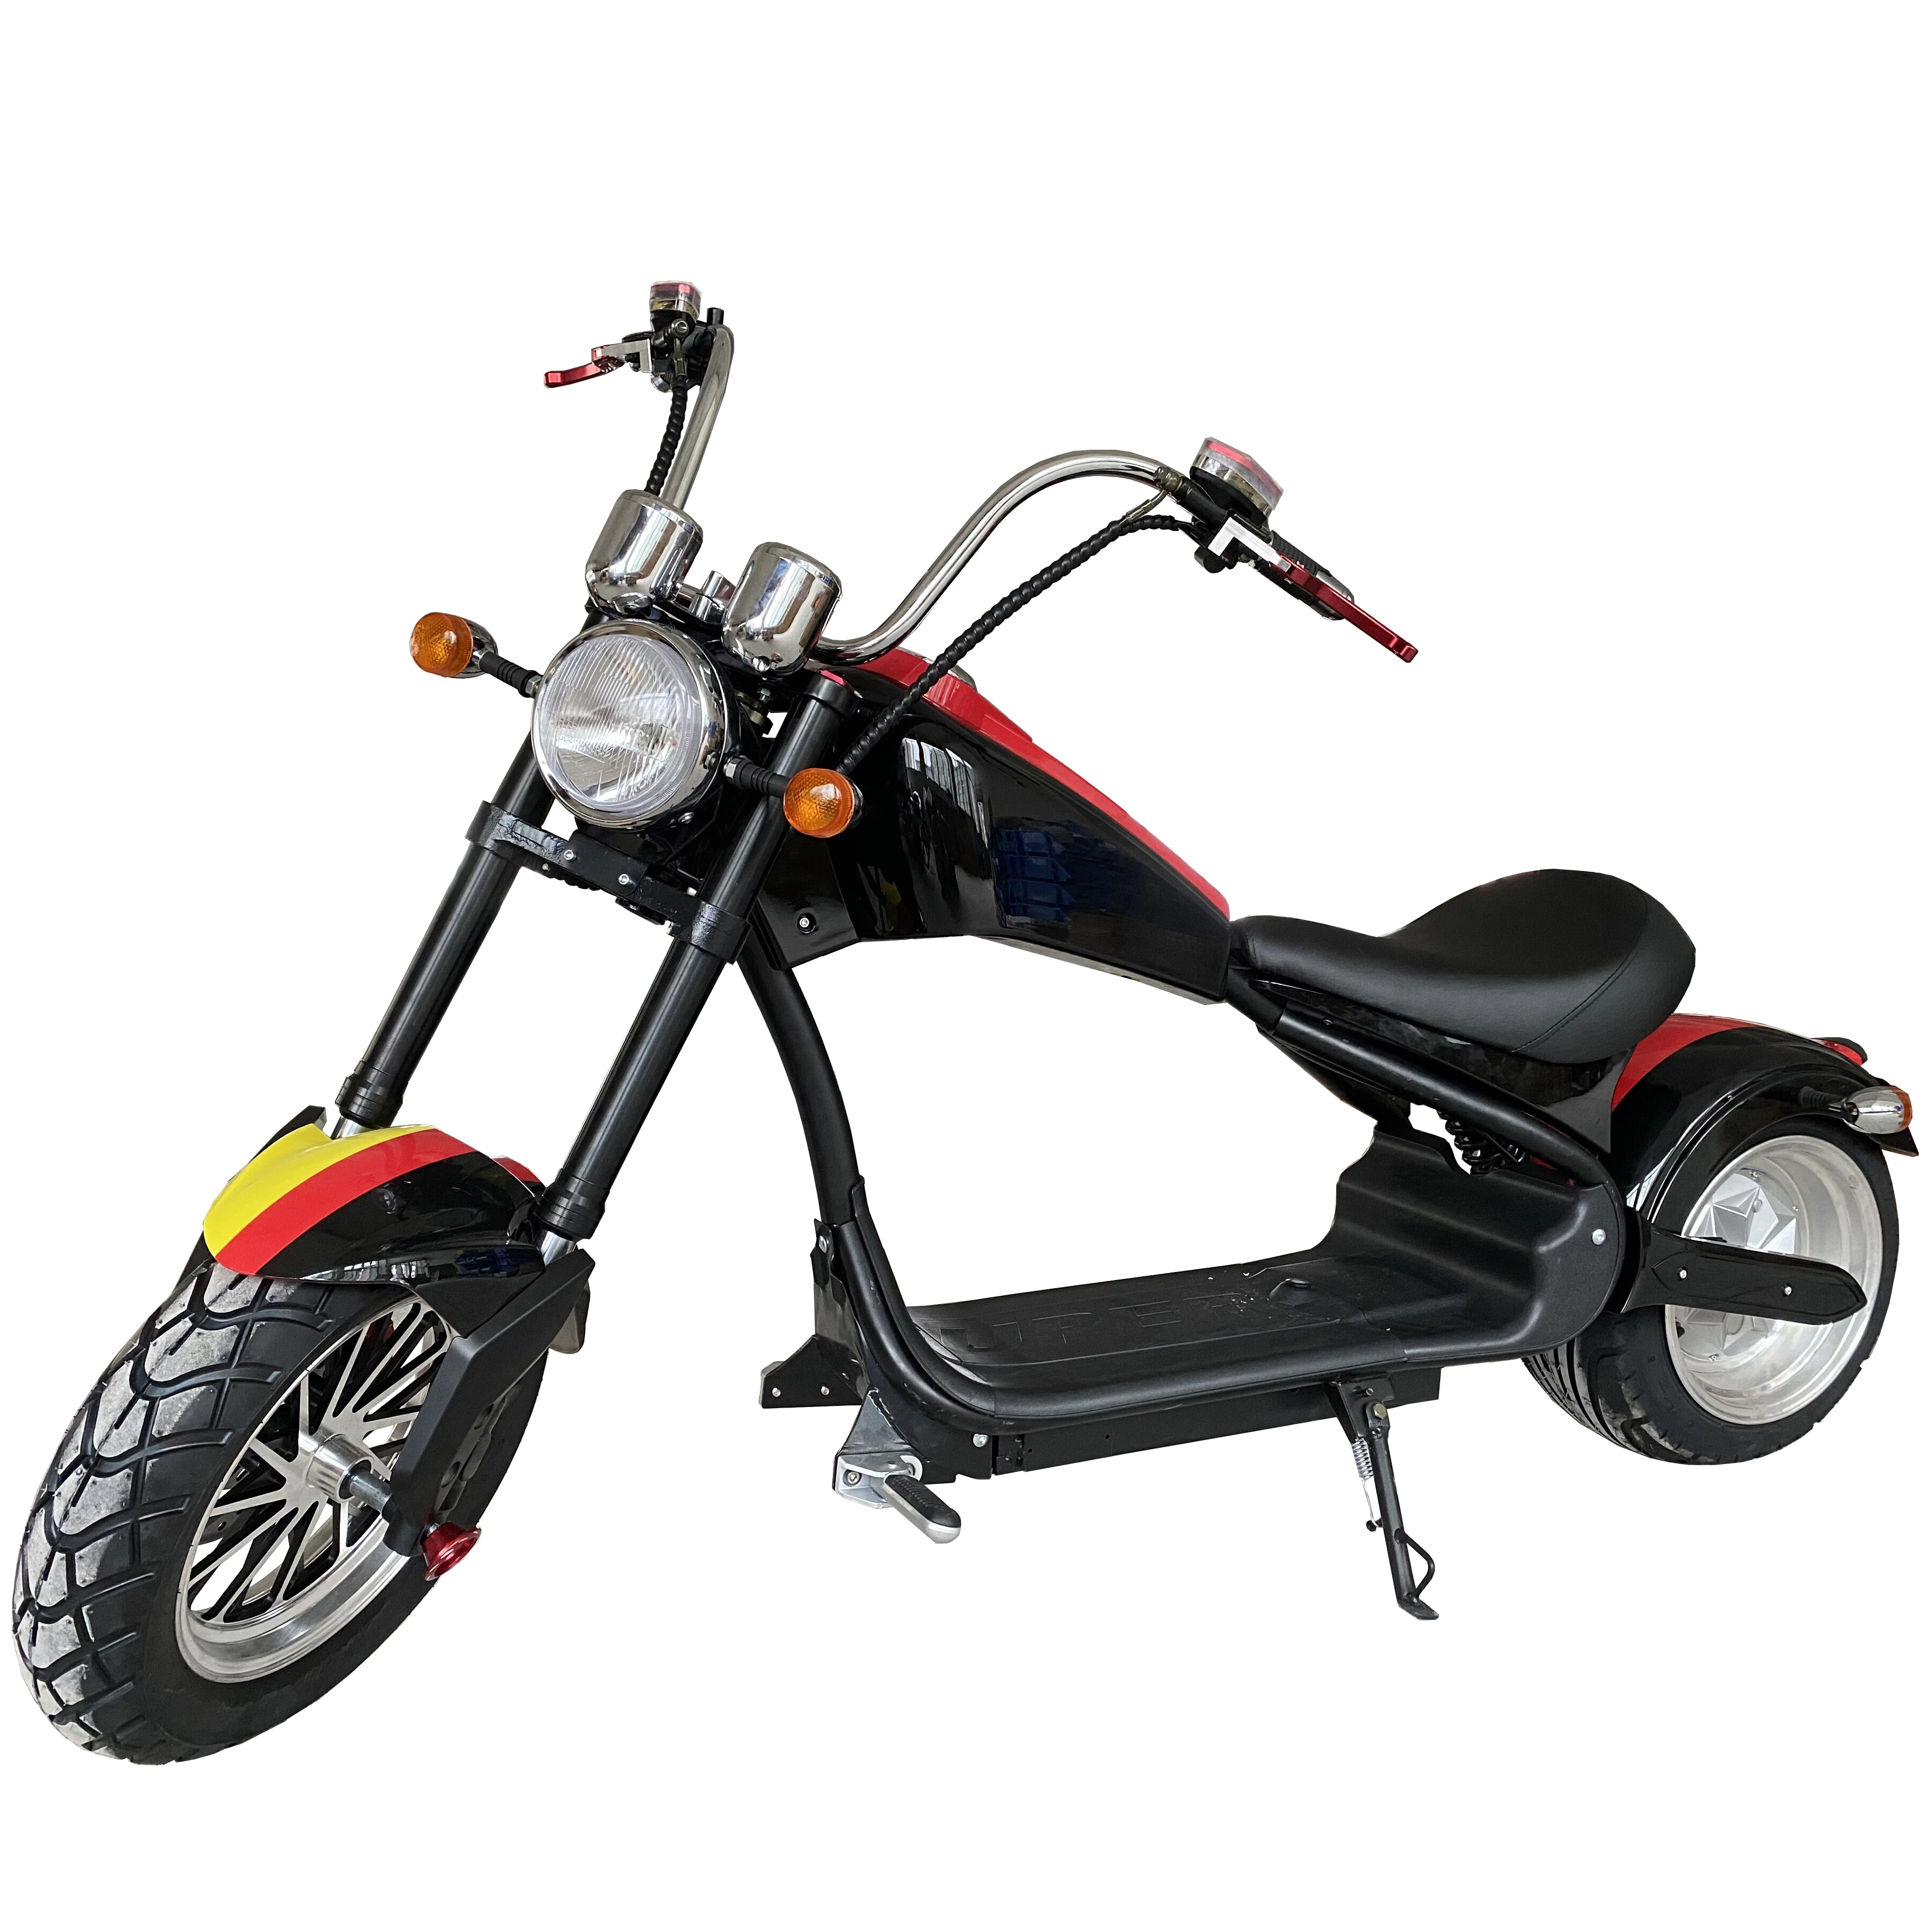 OEM scoter electric scooter motorcycle 3000w citycoco electric bike motorbike